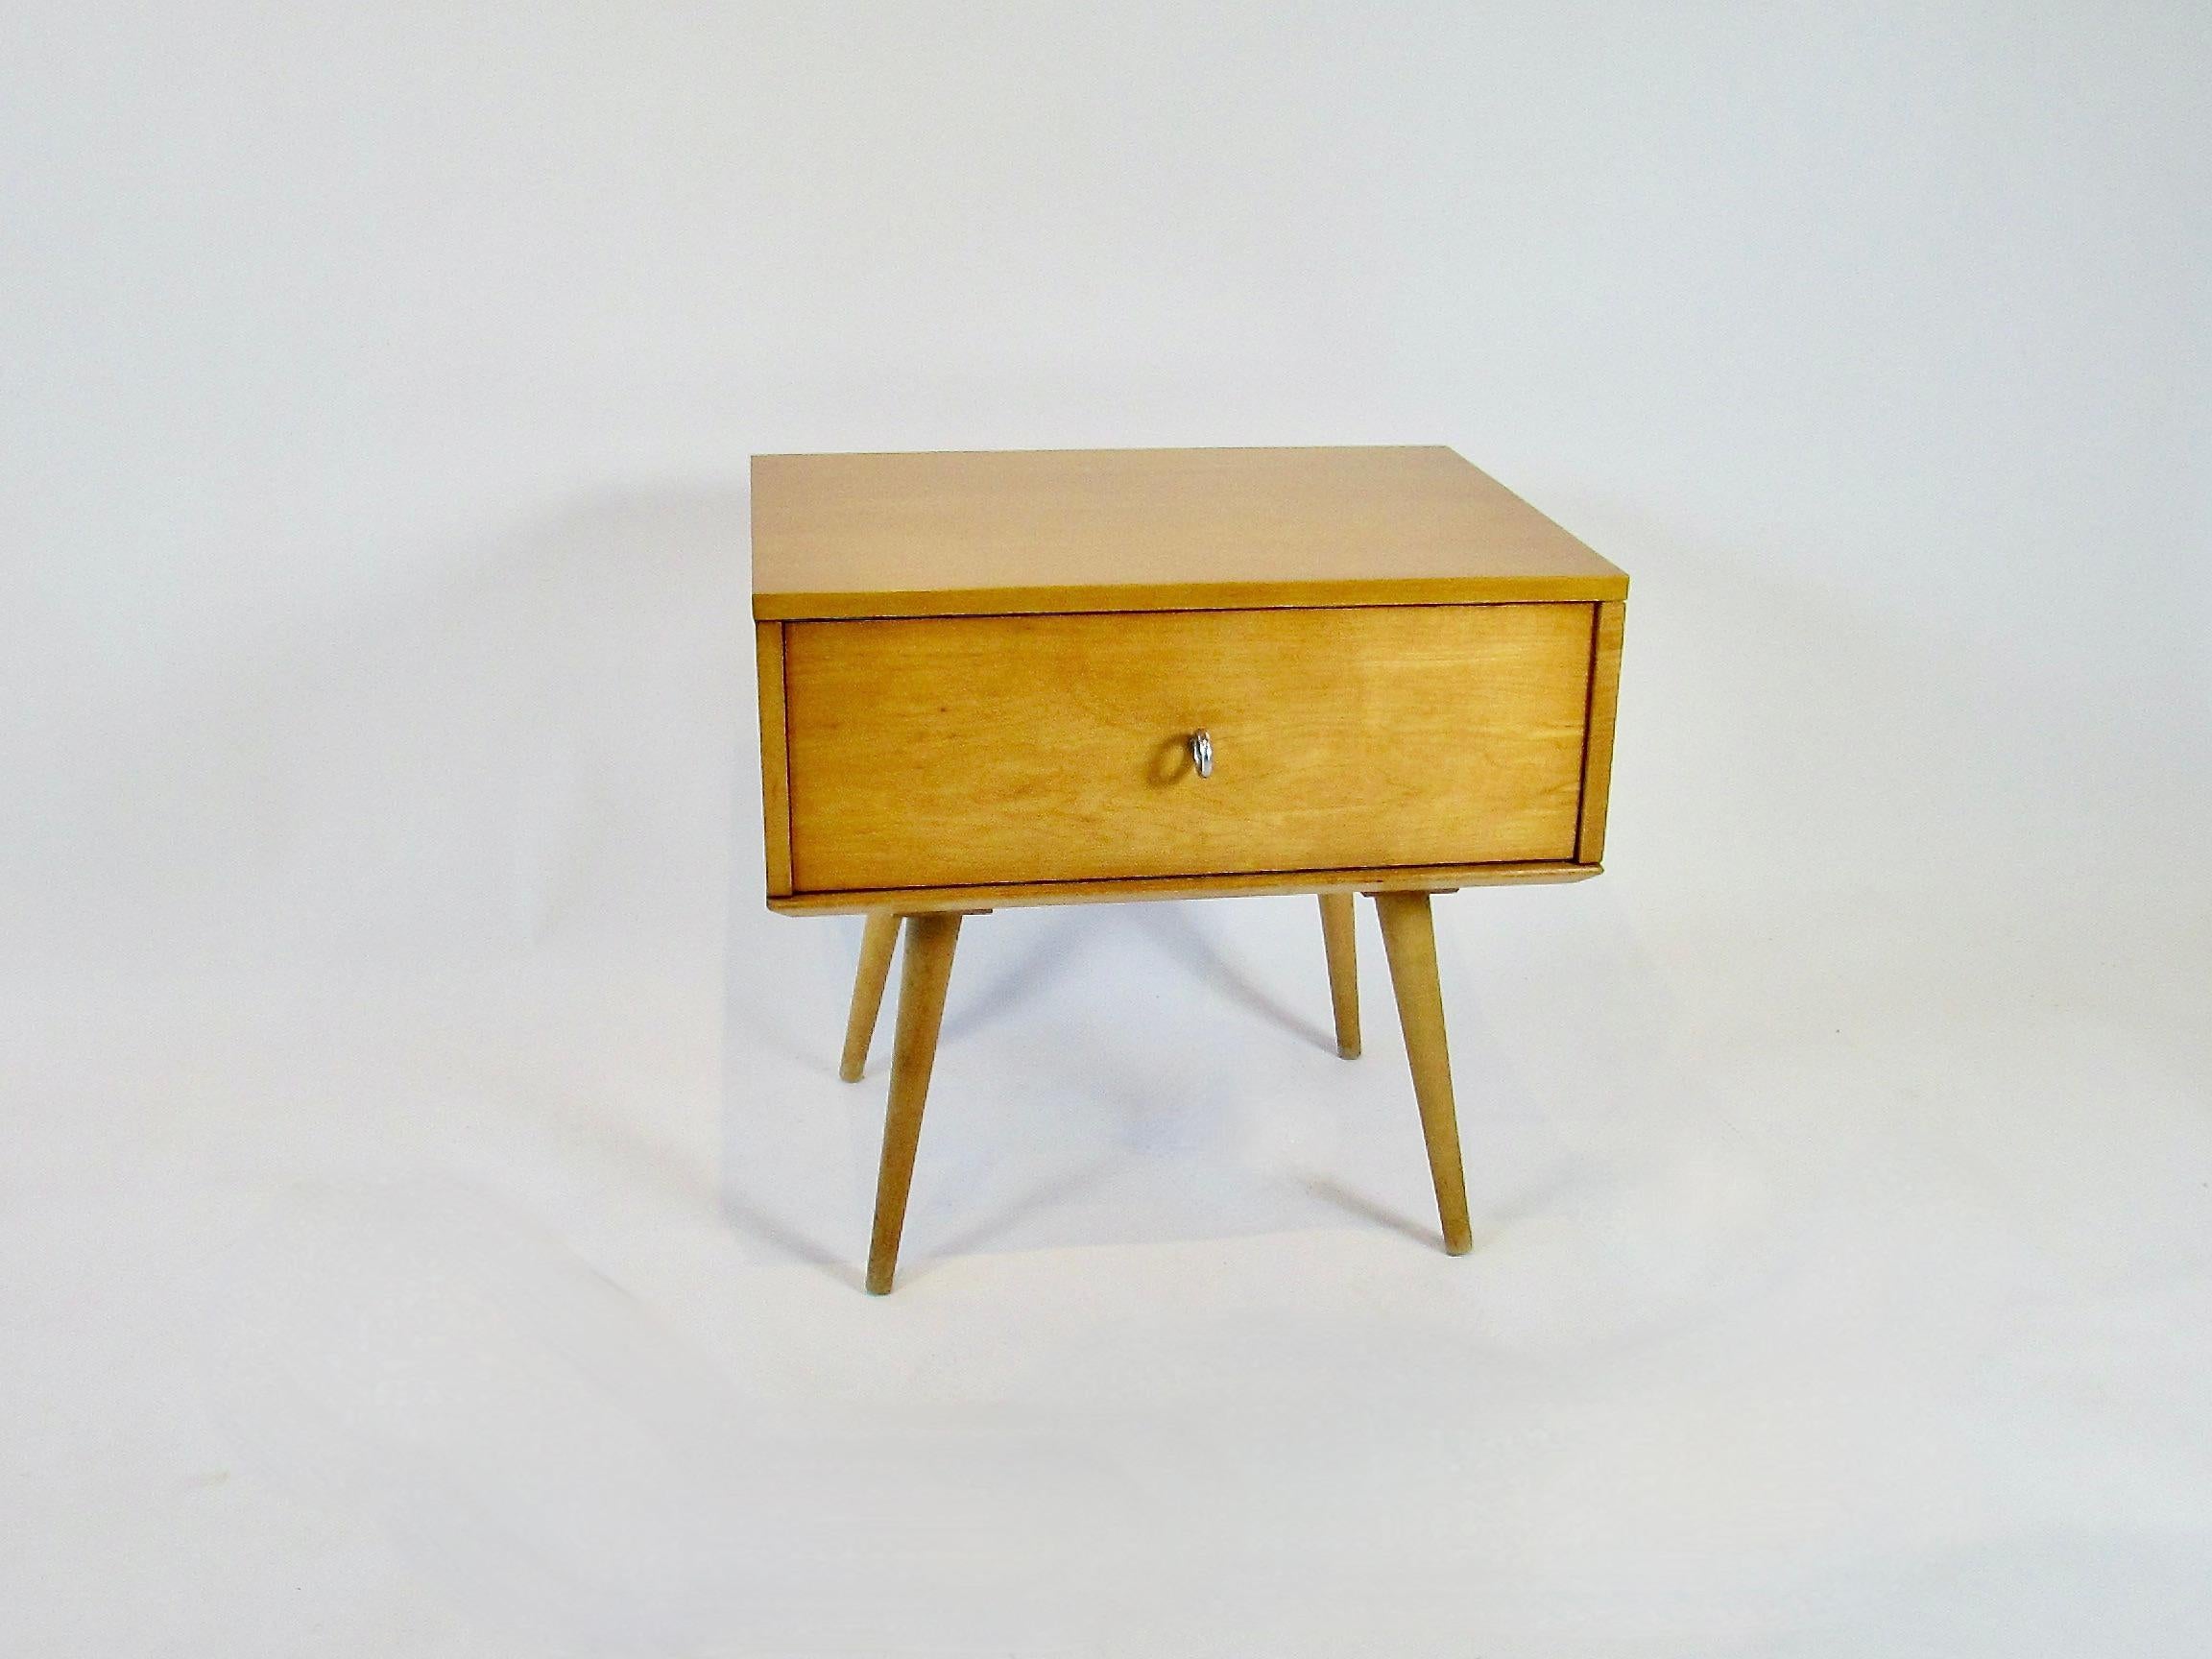 Paul McCobb designed one drawer cabinet on bench for Winchendon Furniture in Mass. This would work as a side table in bed room or living room . Part of the large Planner group collection Introduced in the early 1950s . Planner group being a